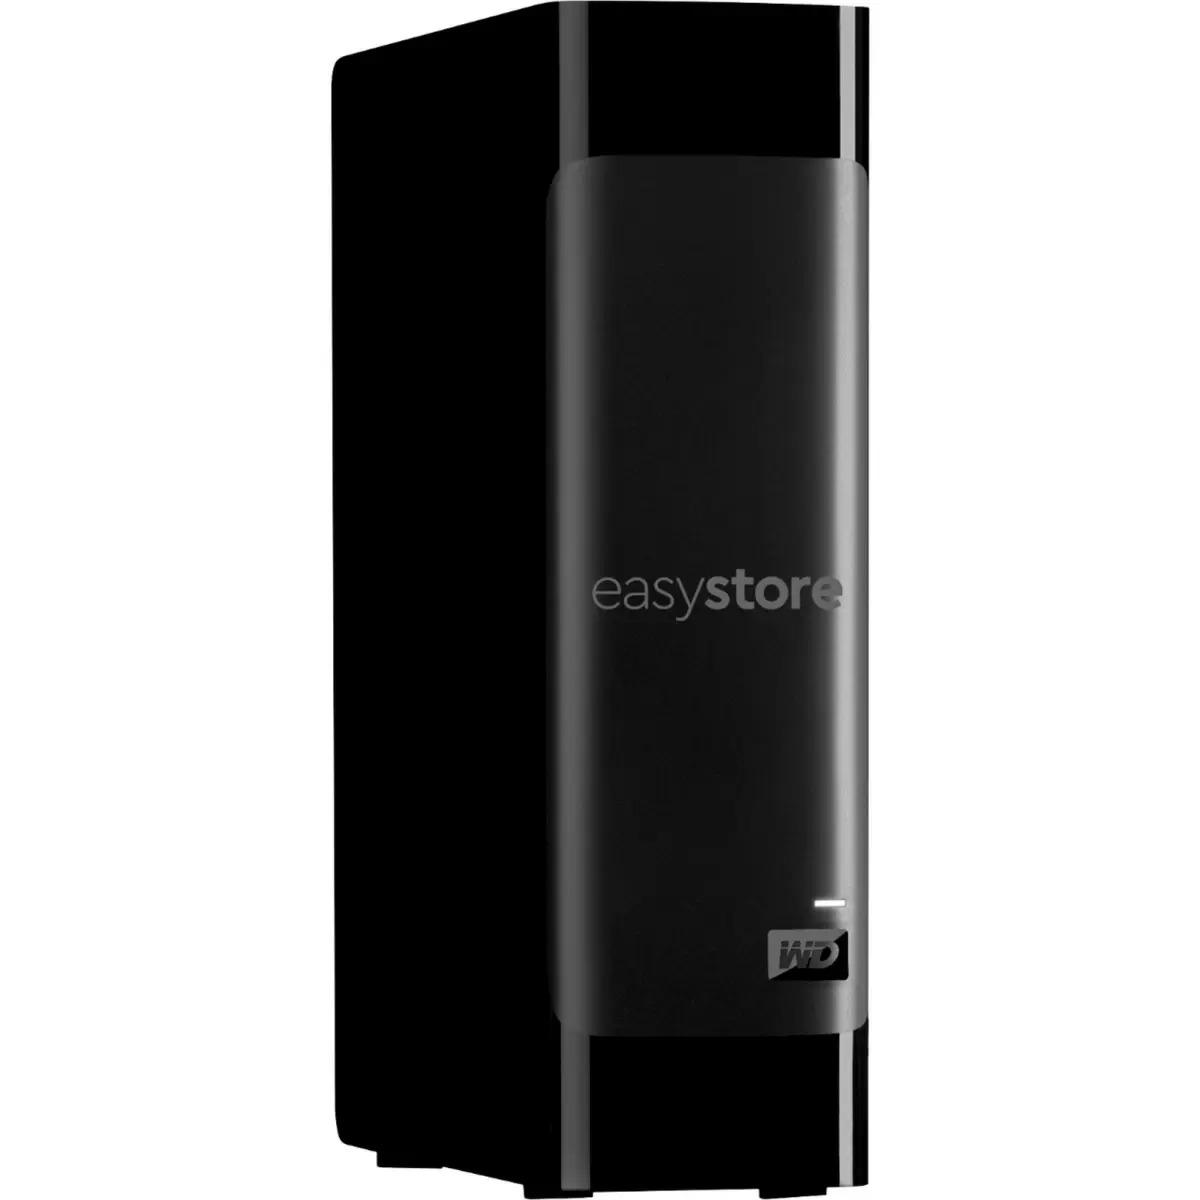 18TB WD Easystore External USB 3.0 Hard Drive for $299.99 Shipped